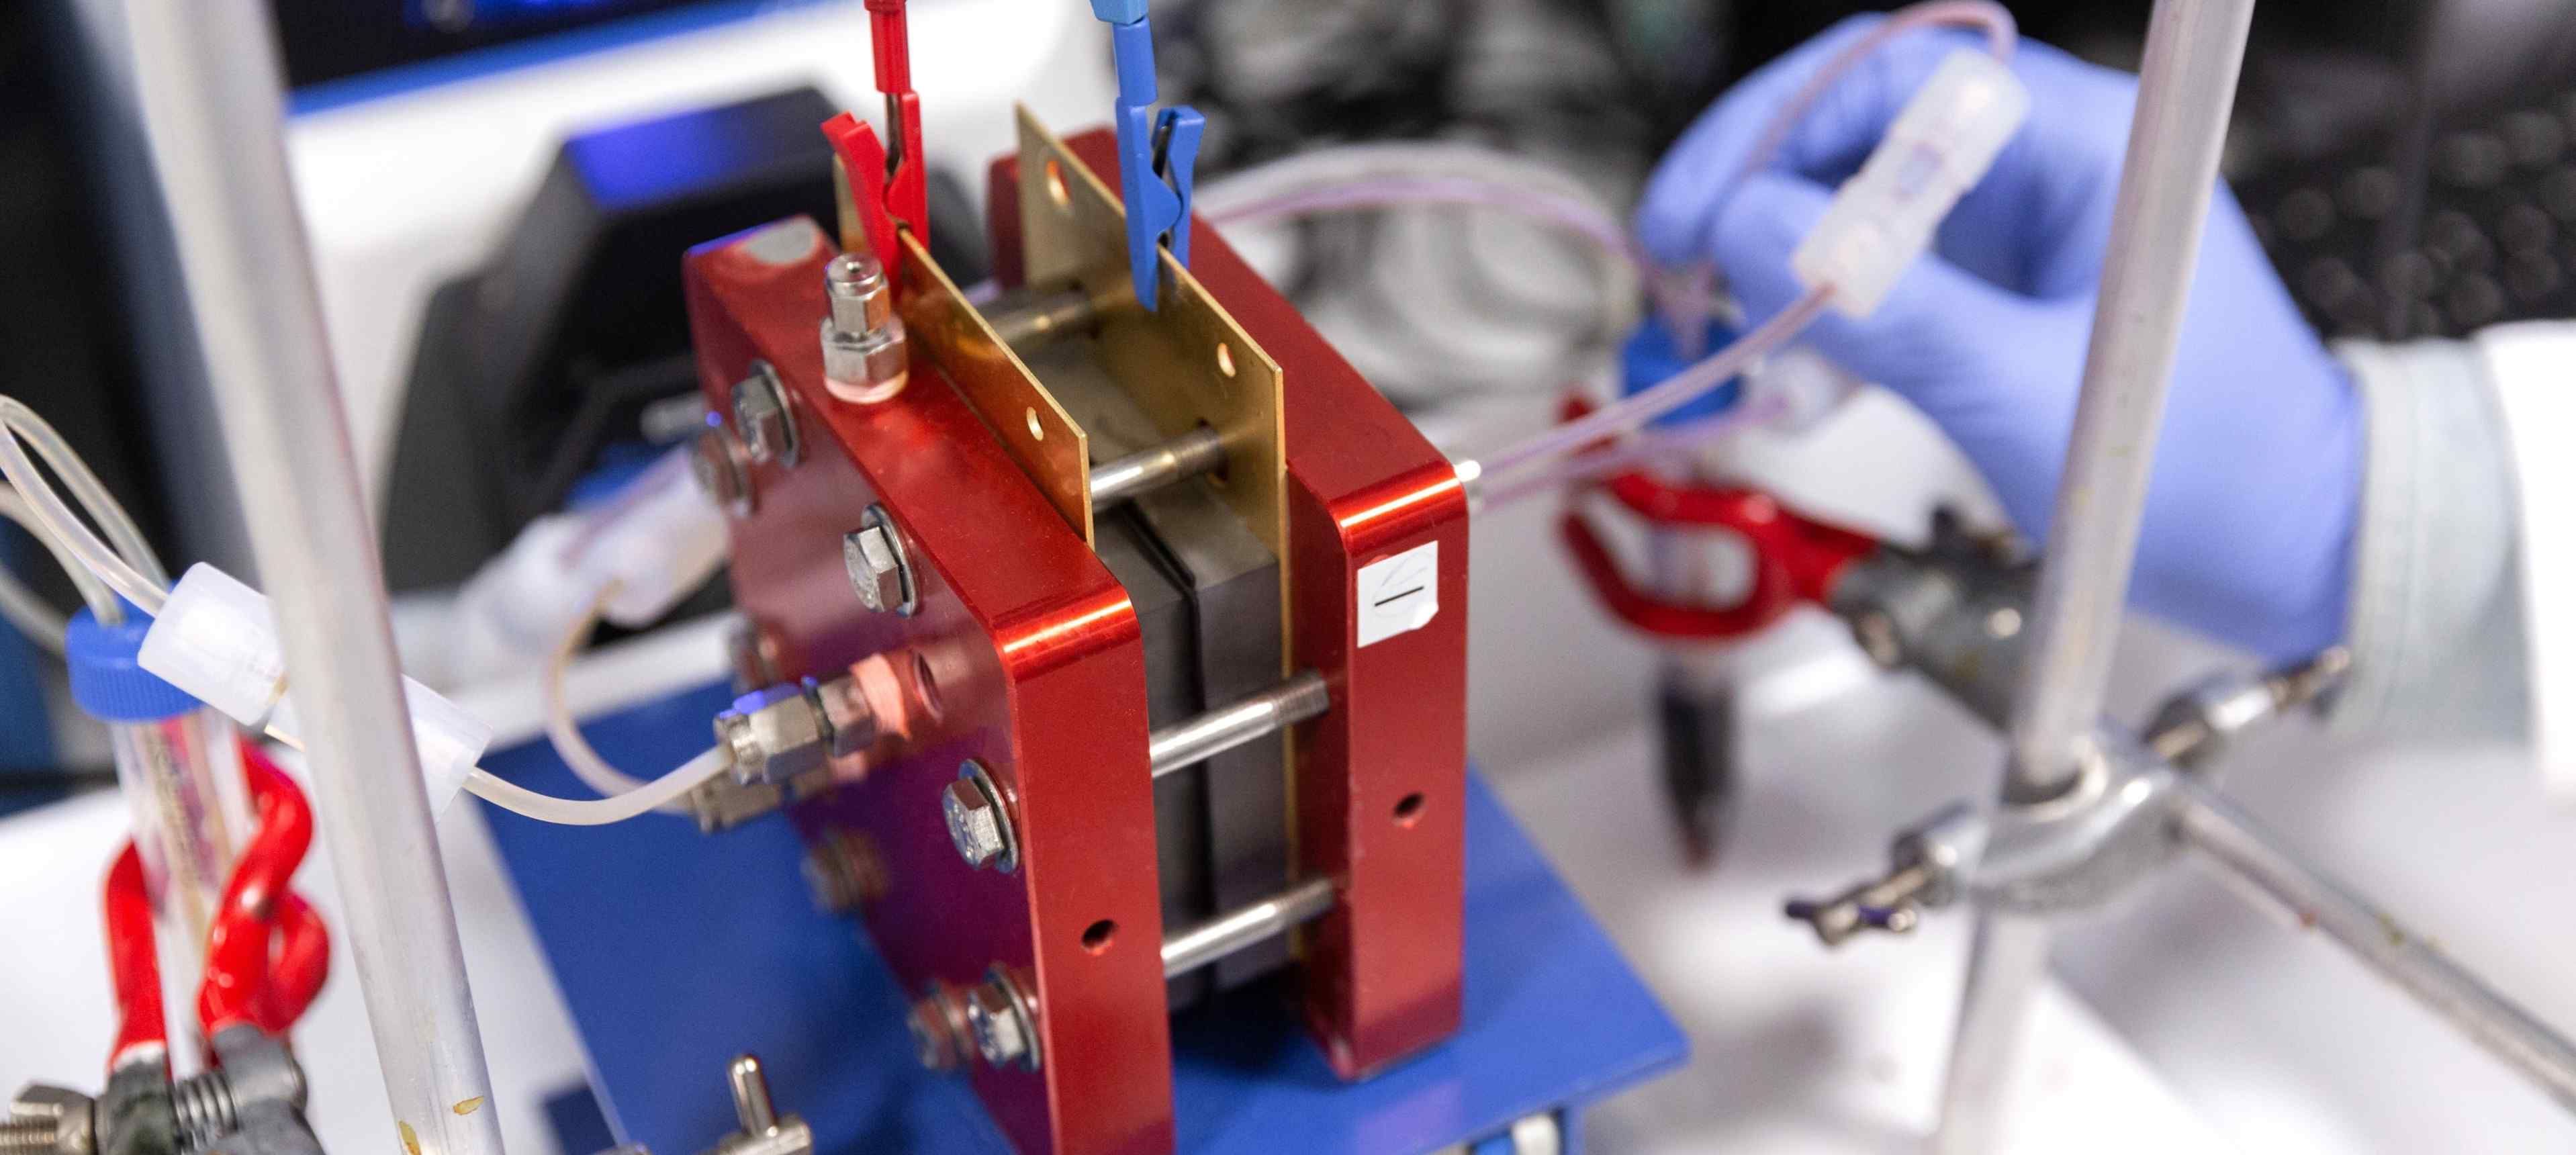 Image of a flow battery